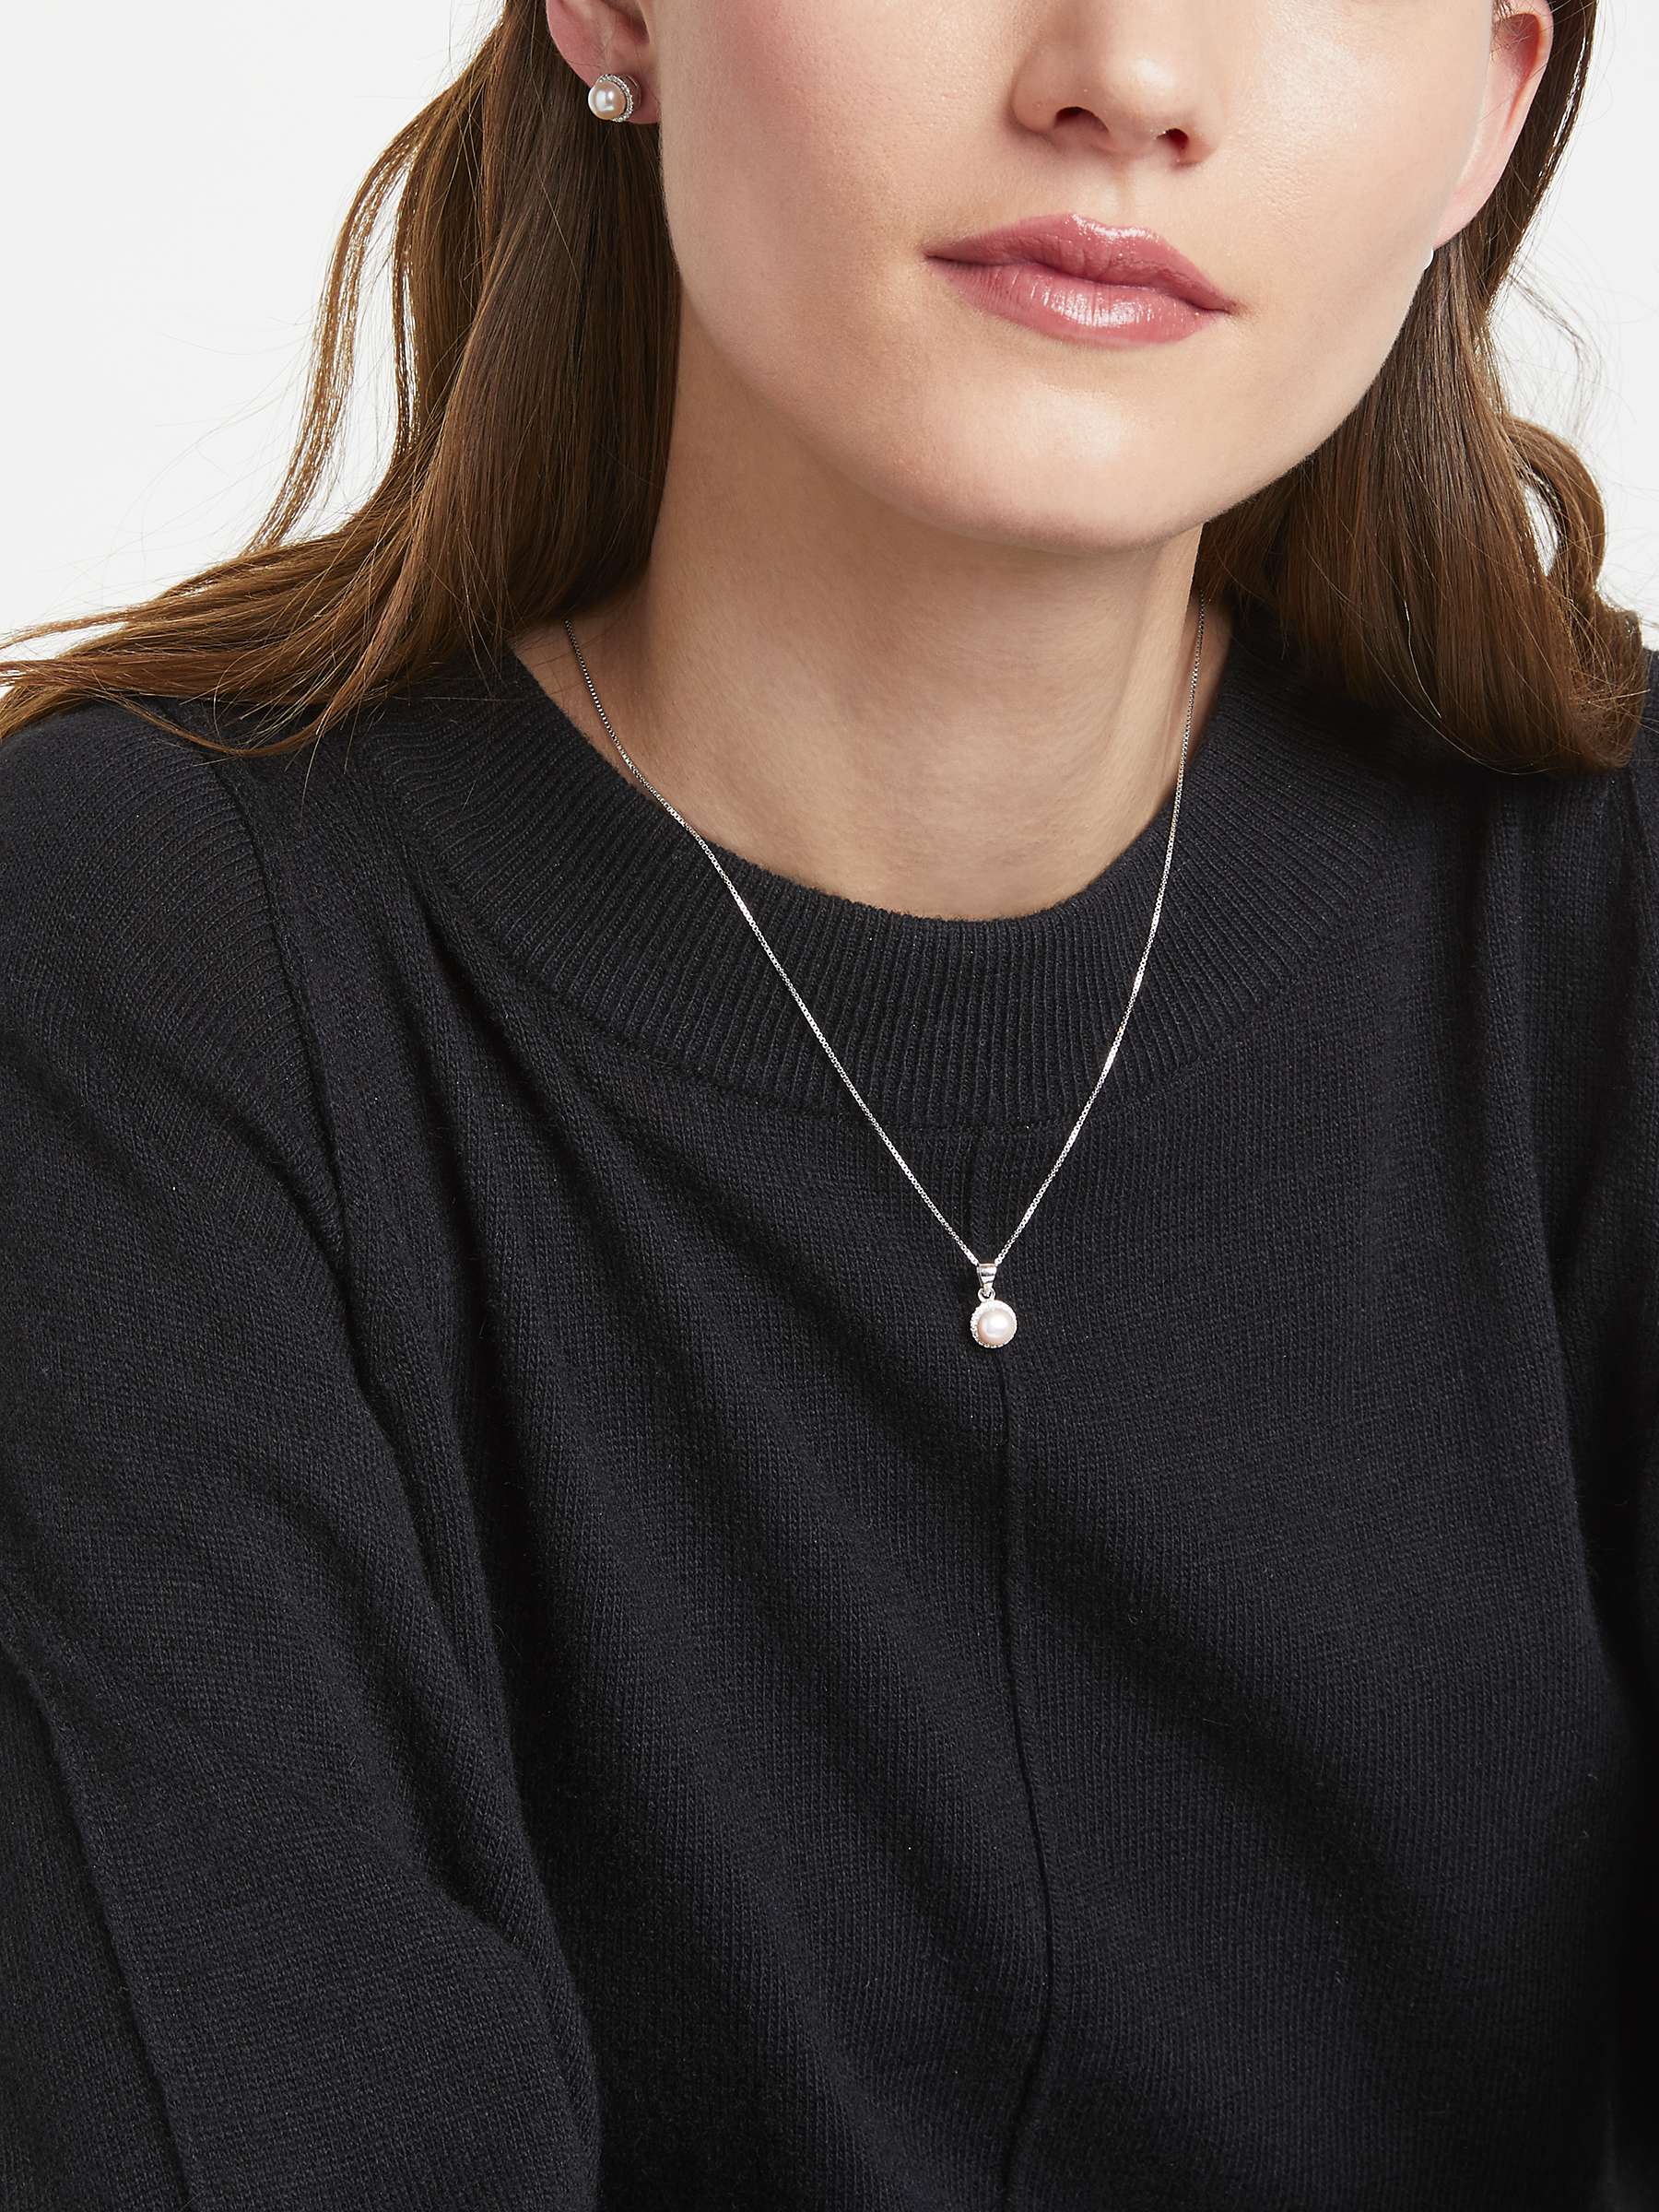 Buy Lido Necklace and Earring Set, White Online at johnlewis.com